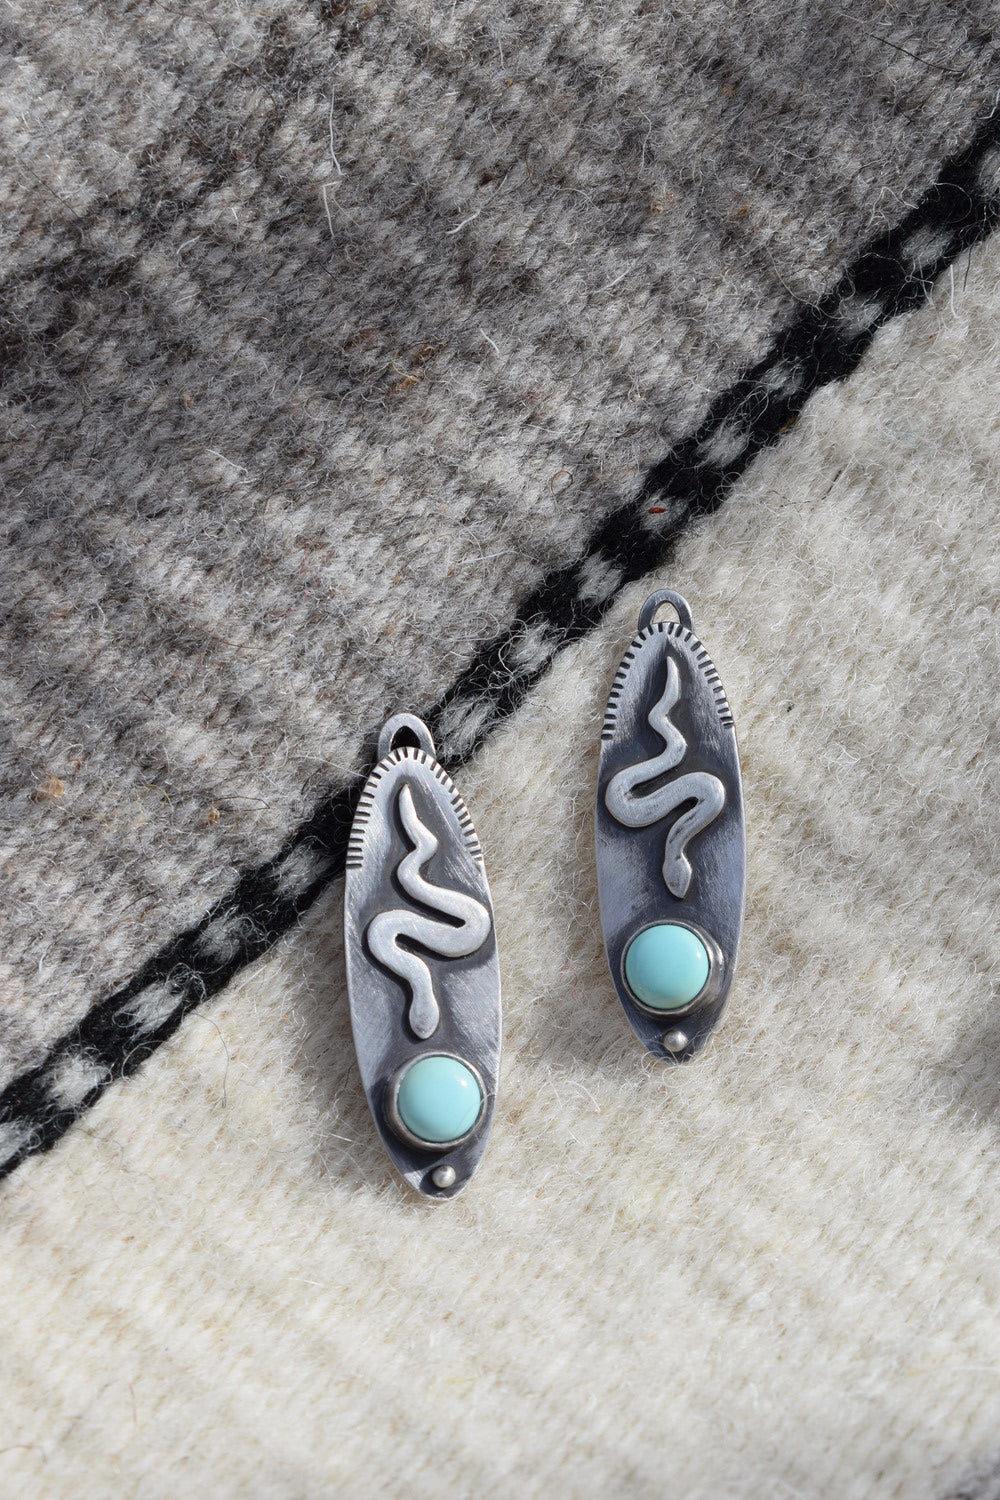 The Serpent Sister earrings are a long oval backplate with cutout snakes at the top. They face small green dots of turquoise at the bottom. The sides are line stamped.